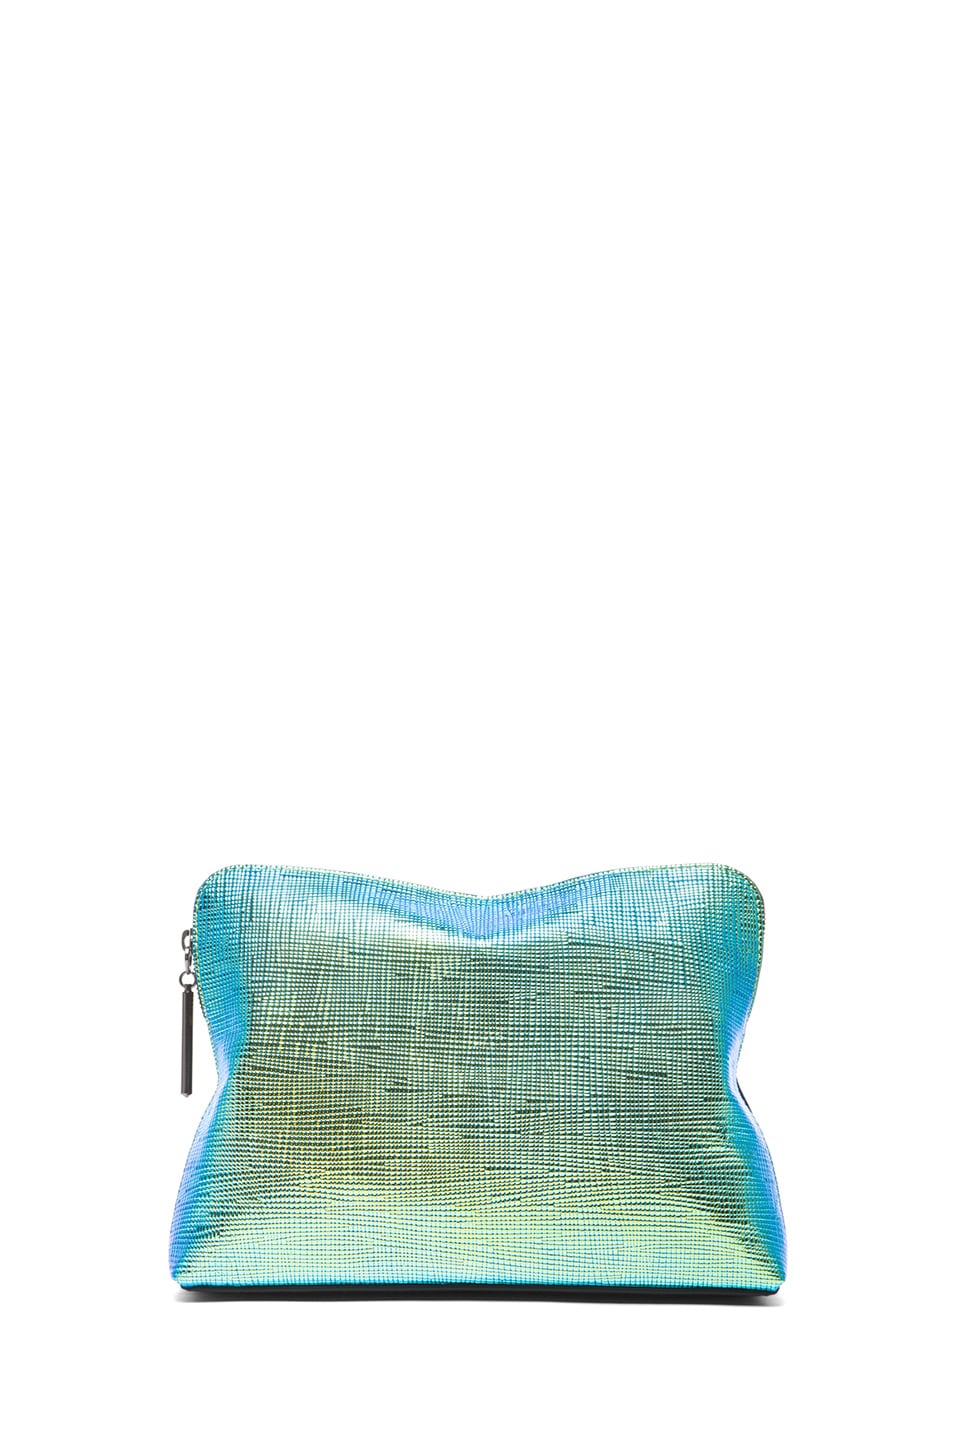 Image 1 of 3.1 phillip lim 31 Minute Cosmetic Bag in Blue-Green & Black